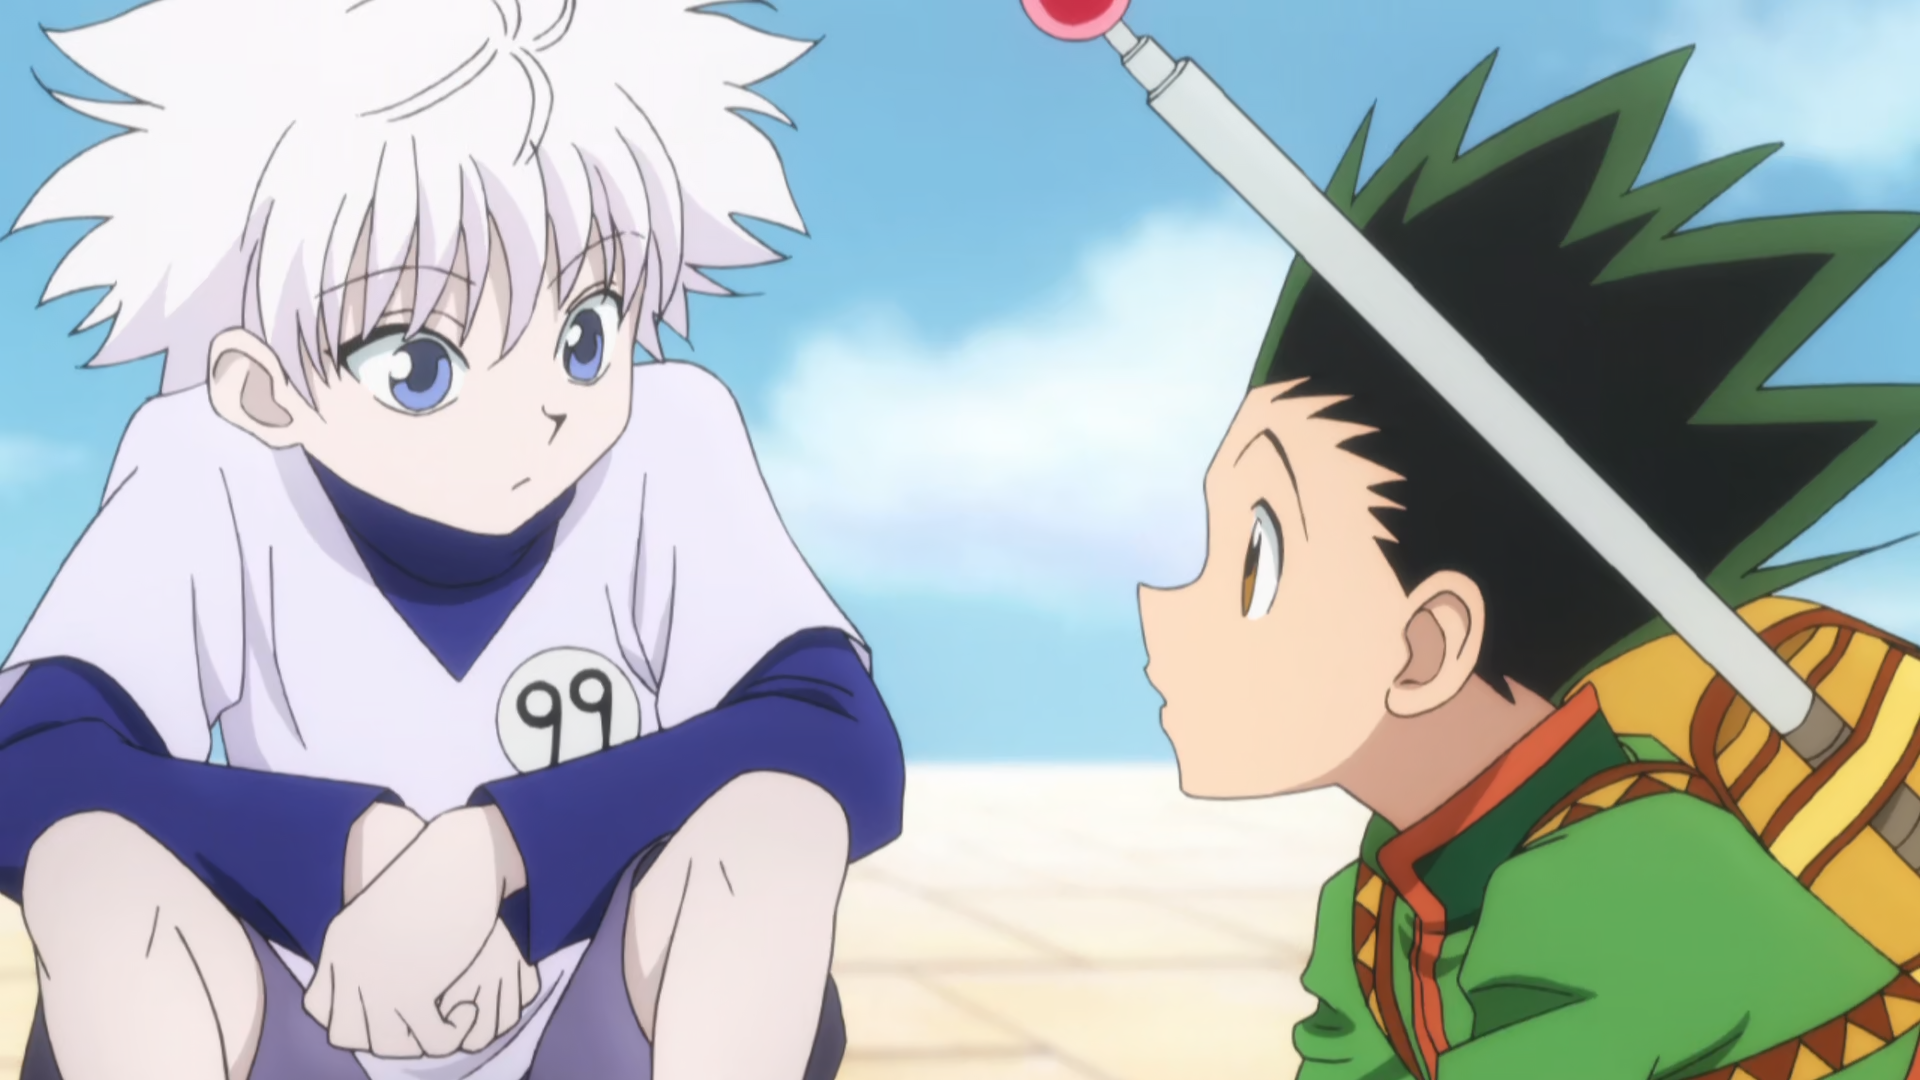 http://vignette2.wikia.nocookie.net/hunterxhunter/images/8/83/Gon_%26_Killua_discover_a_trap_door_(Trick_Tower).PNG/revision/latest?cb=20120107073124